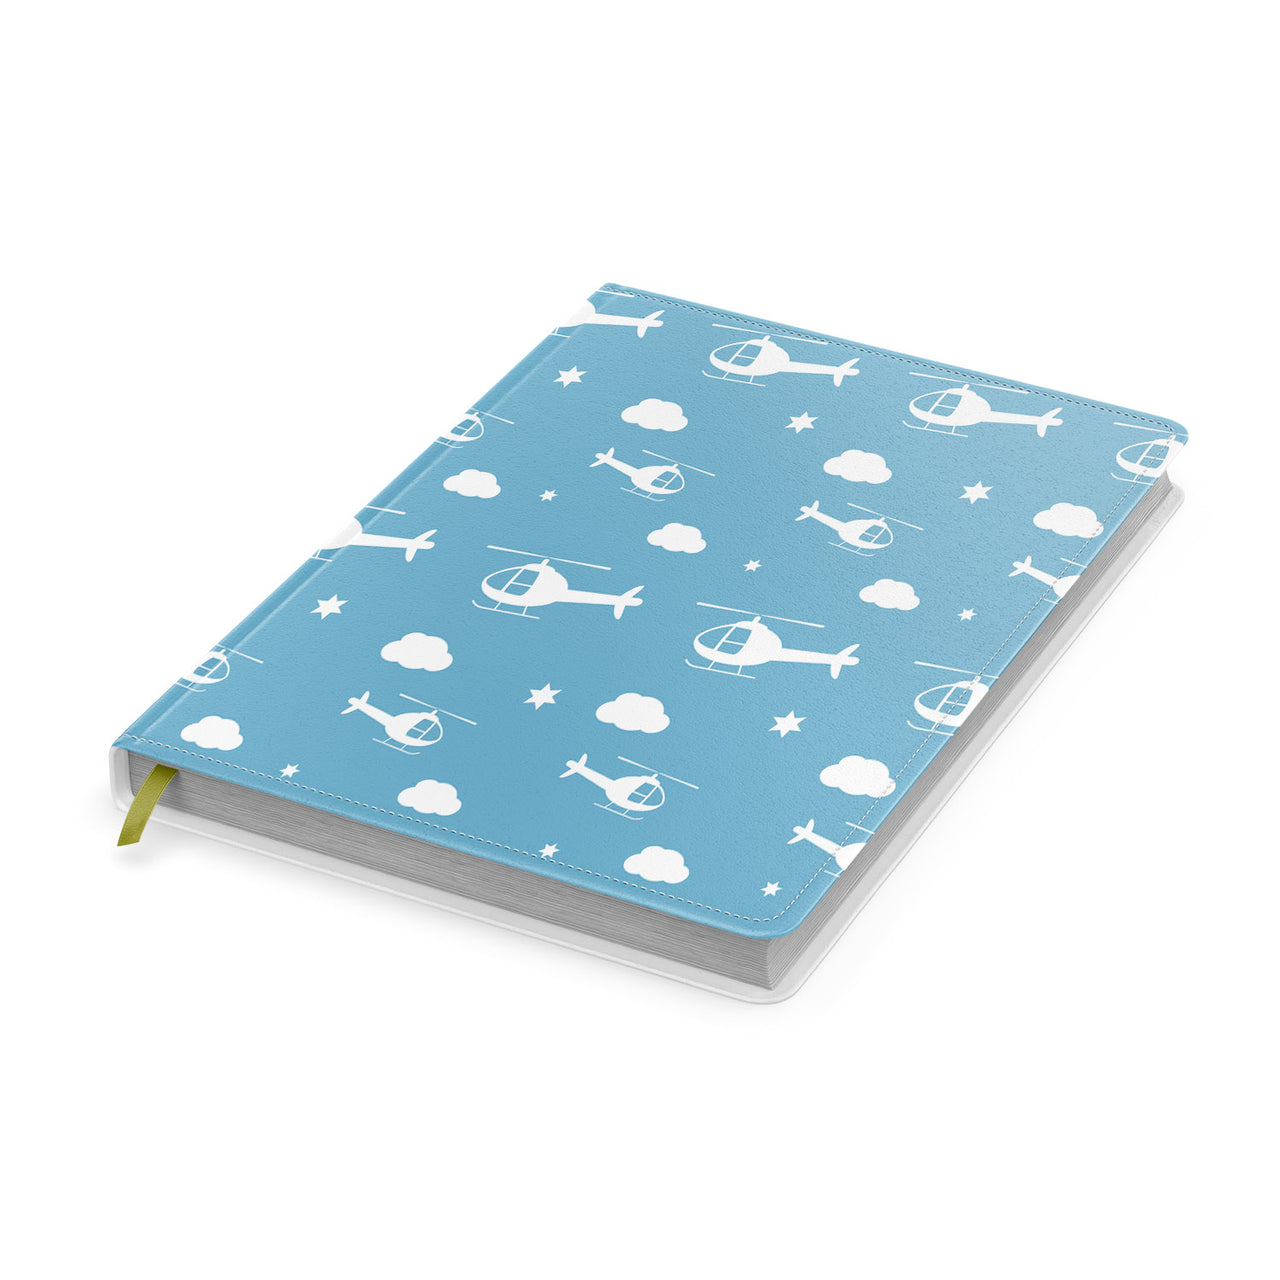 Helicopters & Clouds Designed Notebooks